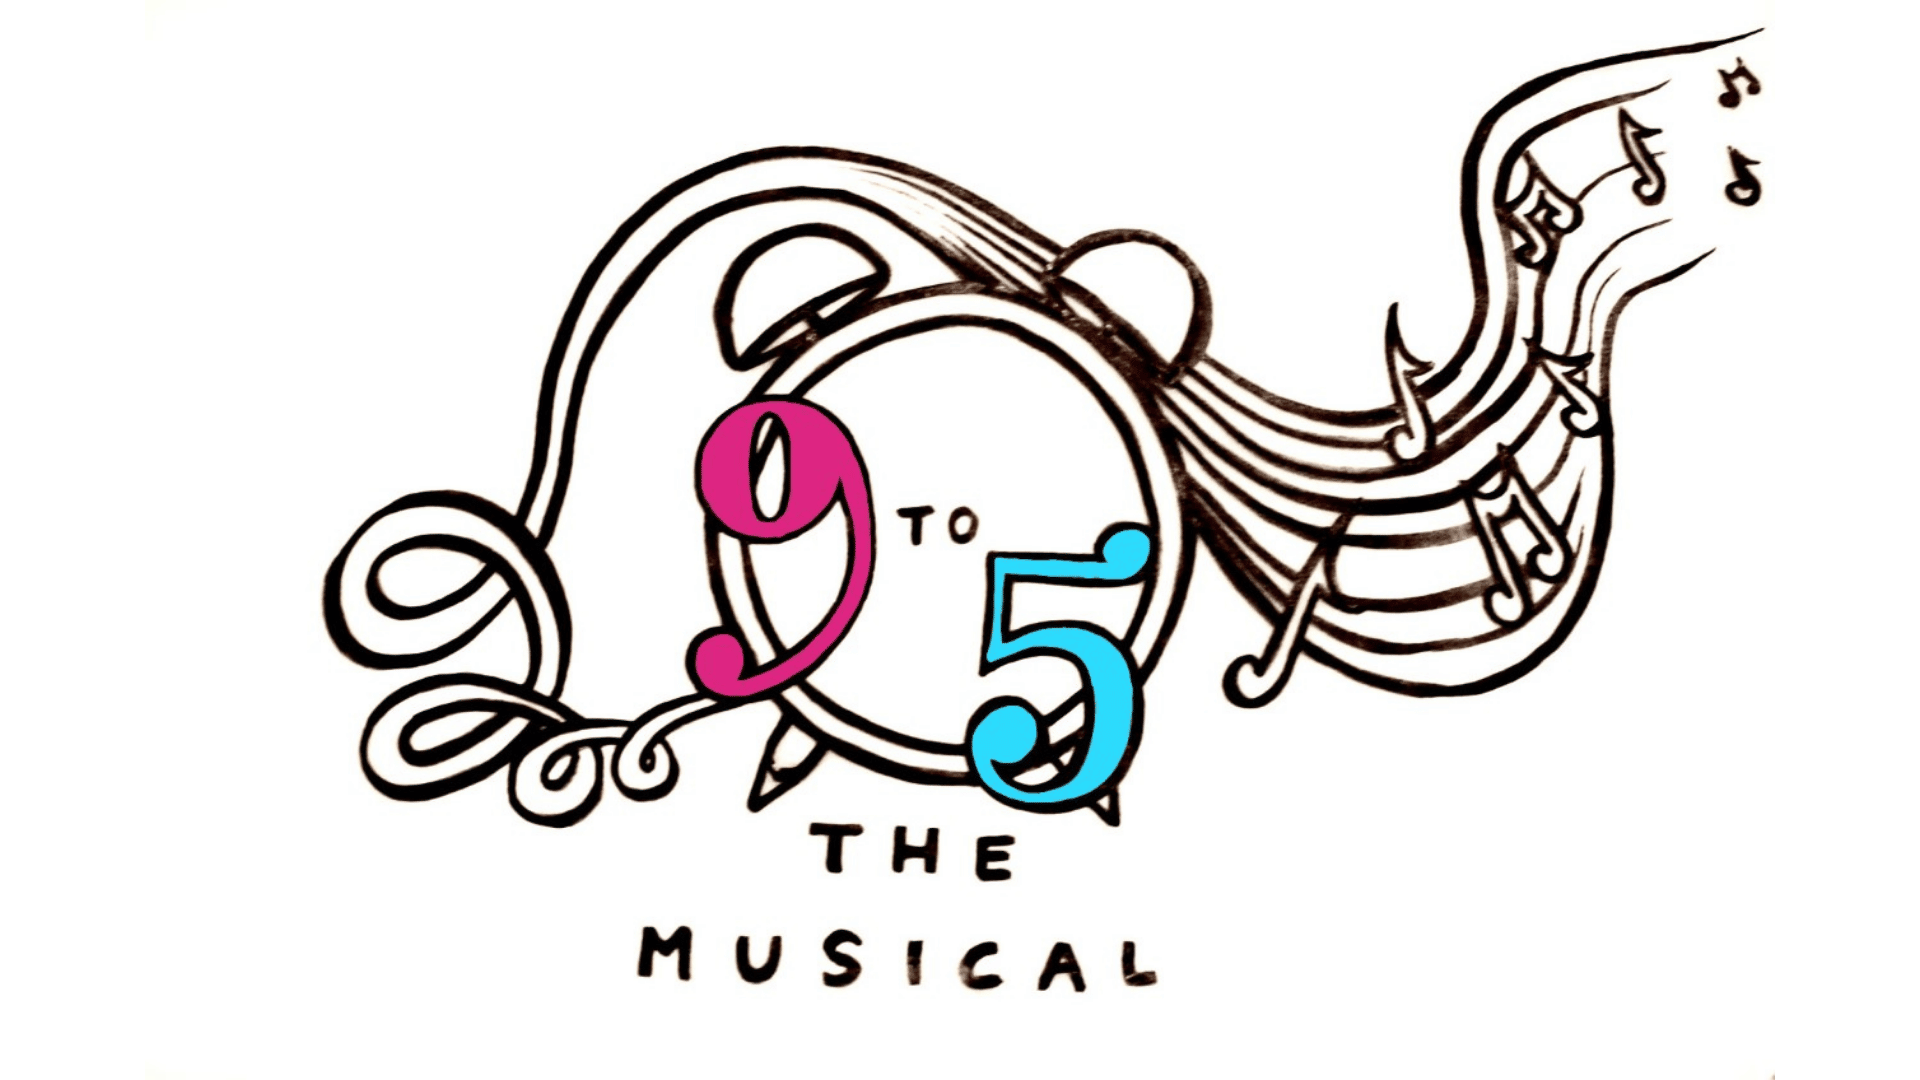 hand-drawn logo for 9 to 5 the musical